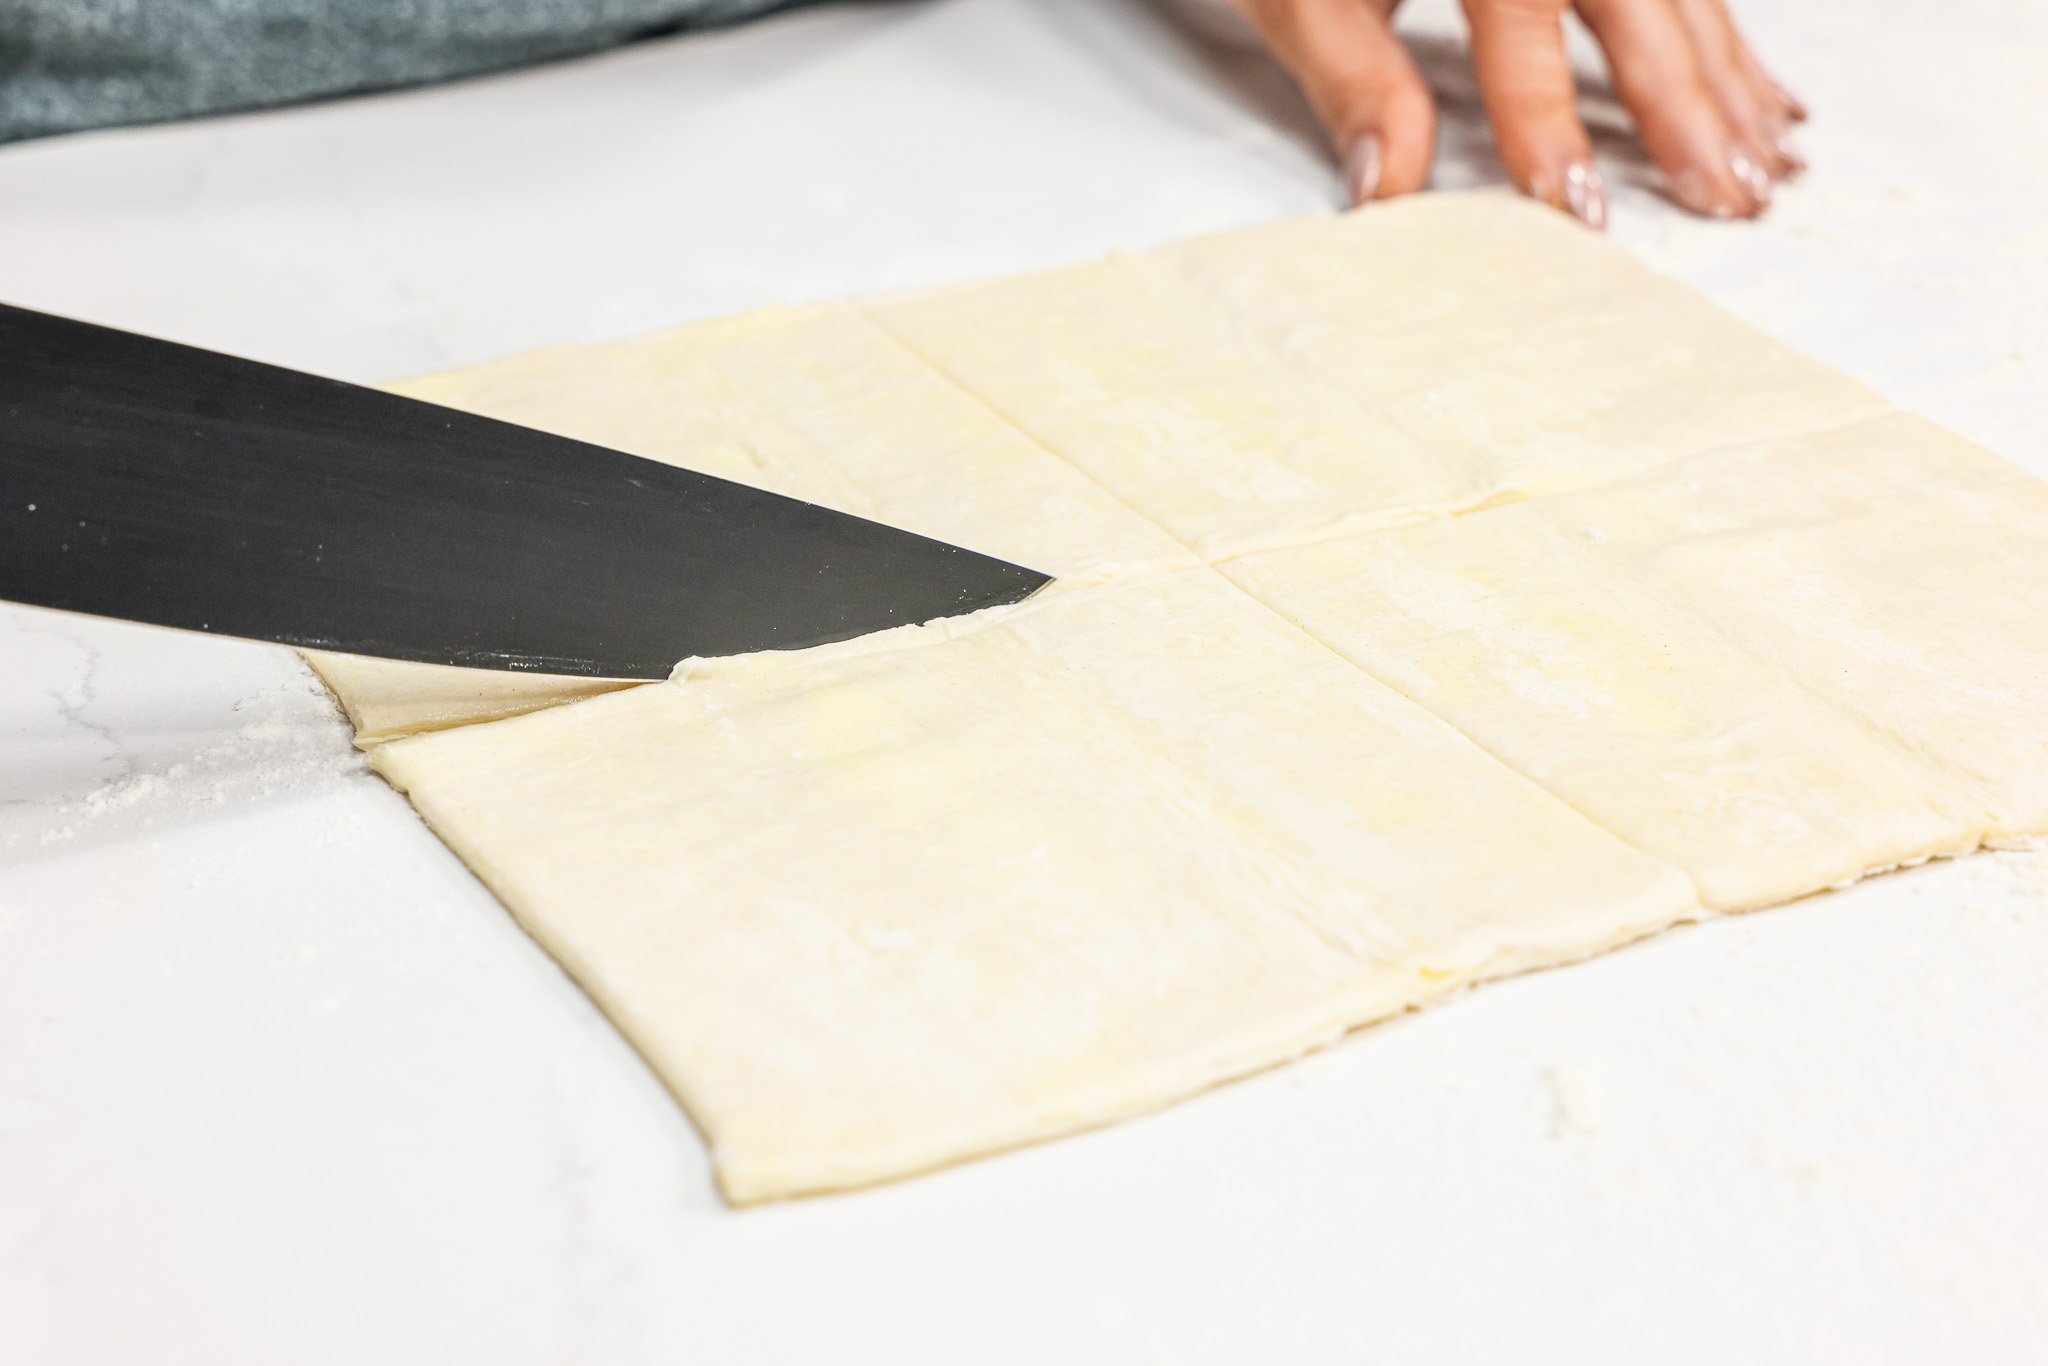 How To Make Turnovers (Step by Step Tutorial with Photos) | BigOven